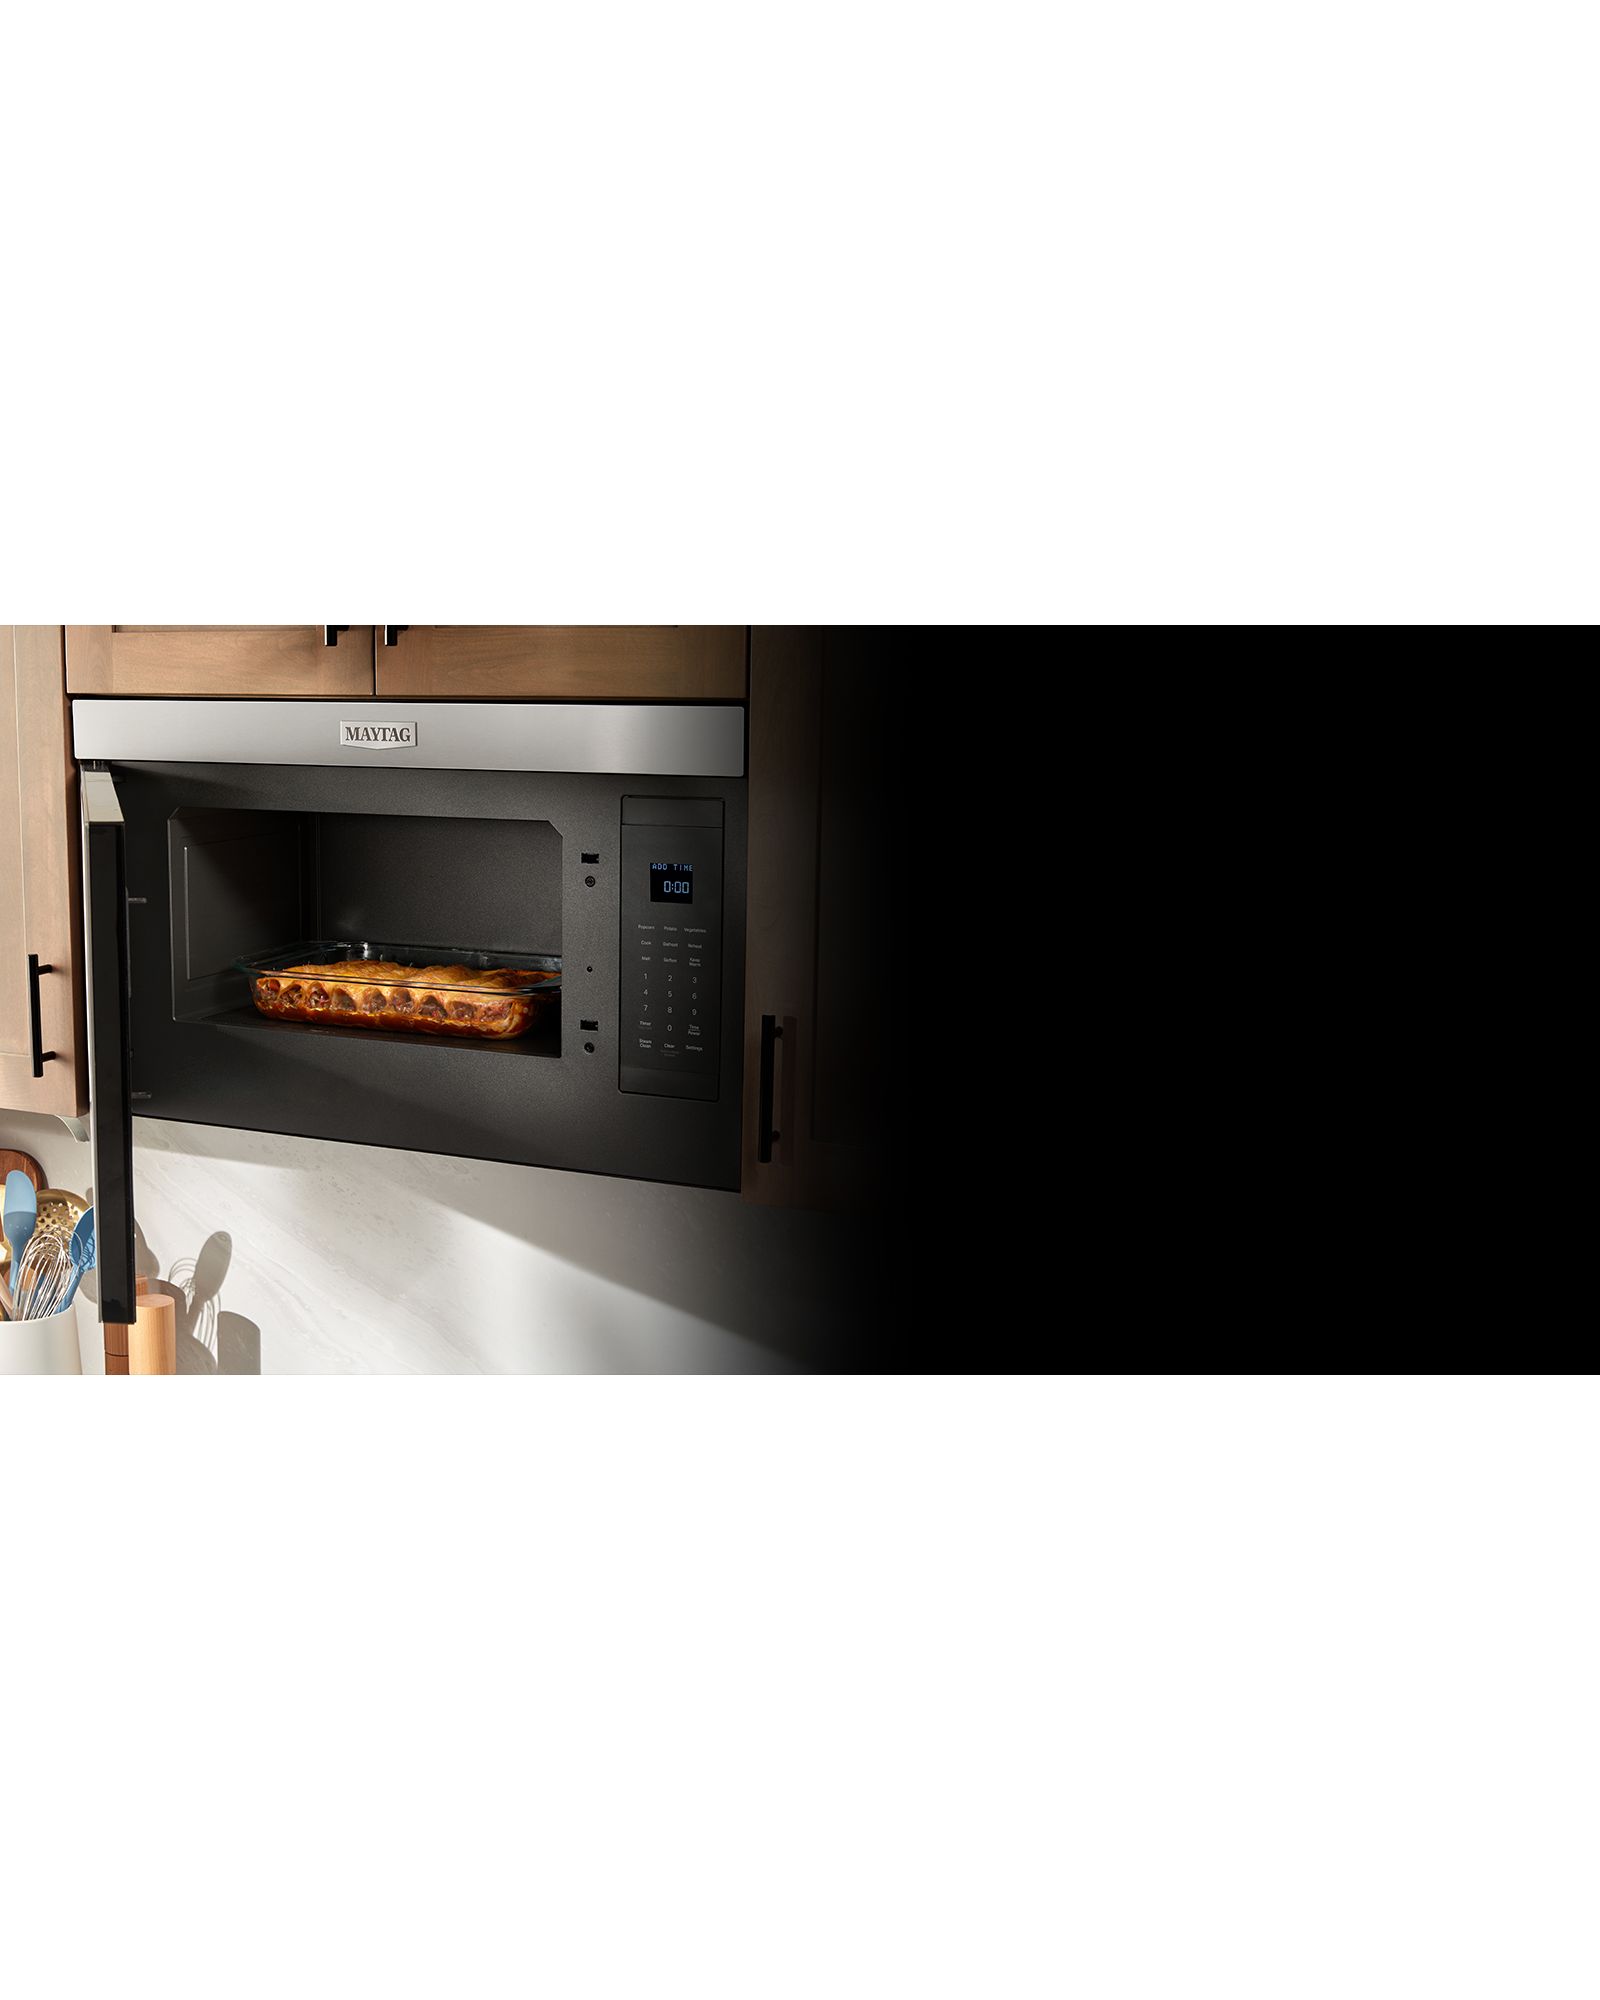 Buy Maytag Over-the-Range Flush Built-In Microwave - 1.1 Cu. Ft.